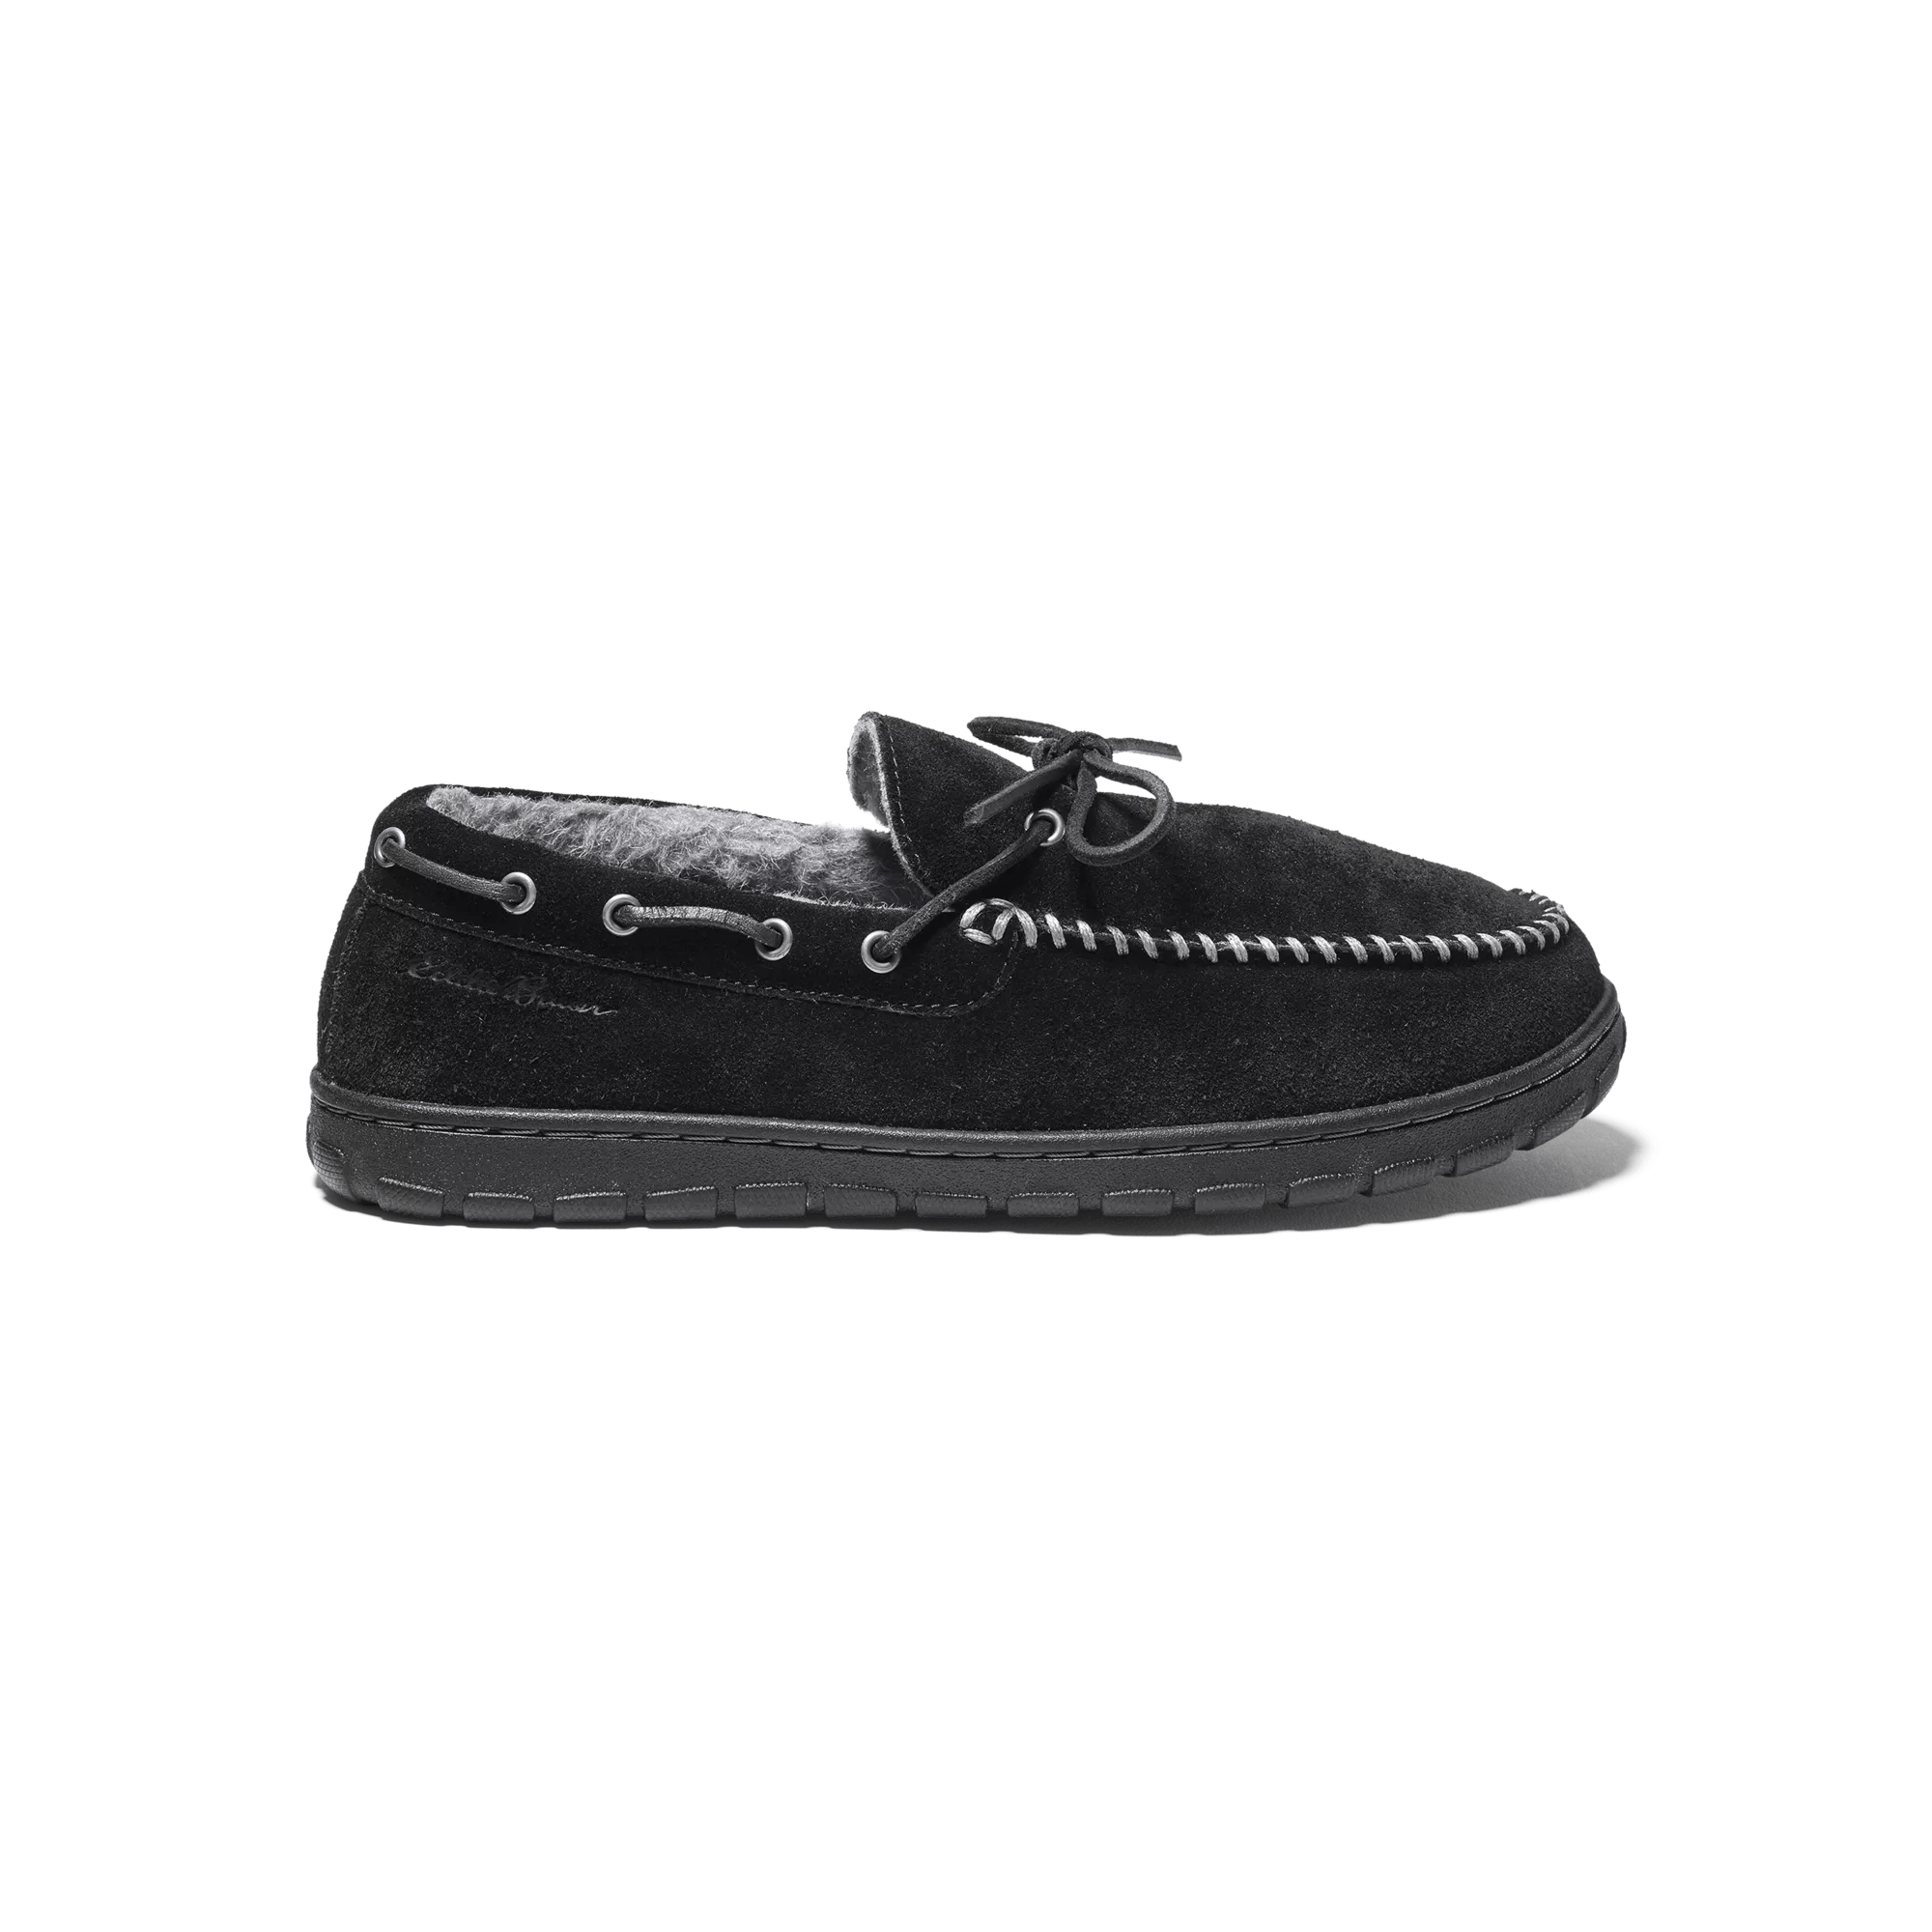 Shearling-Lined Moccasin Slippers